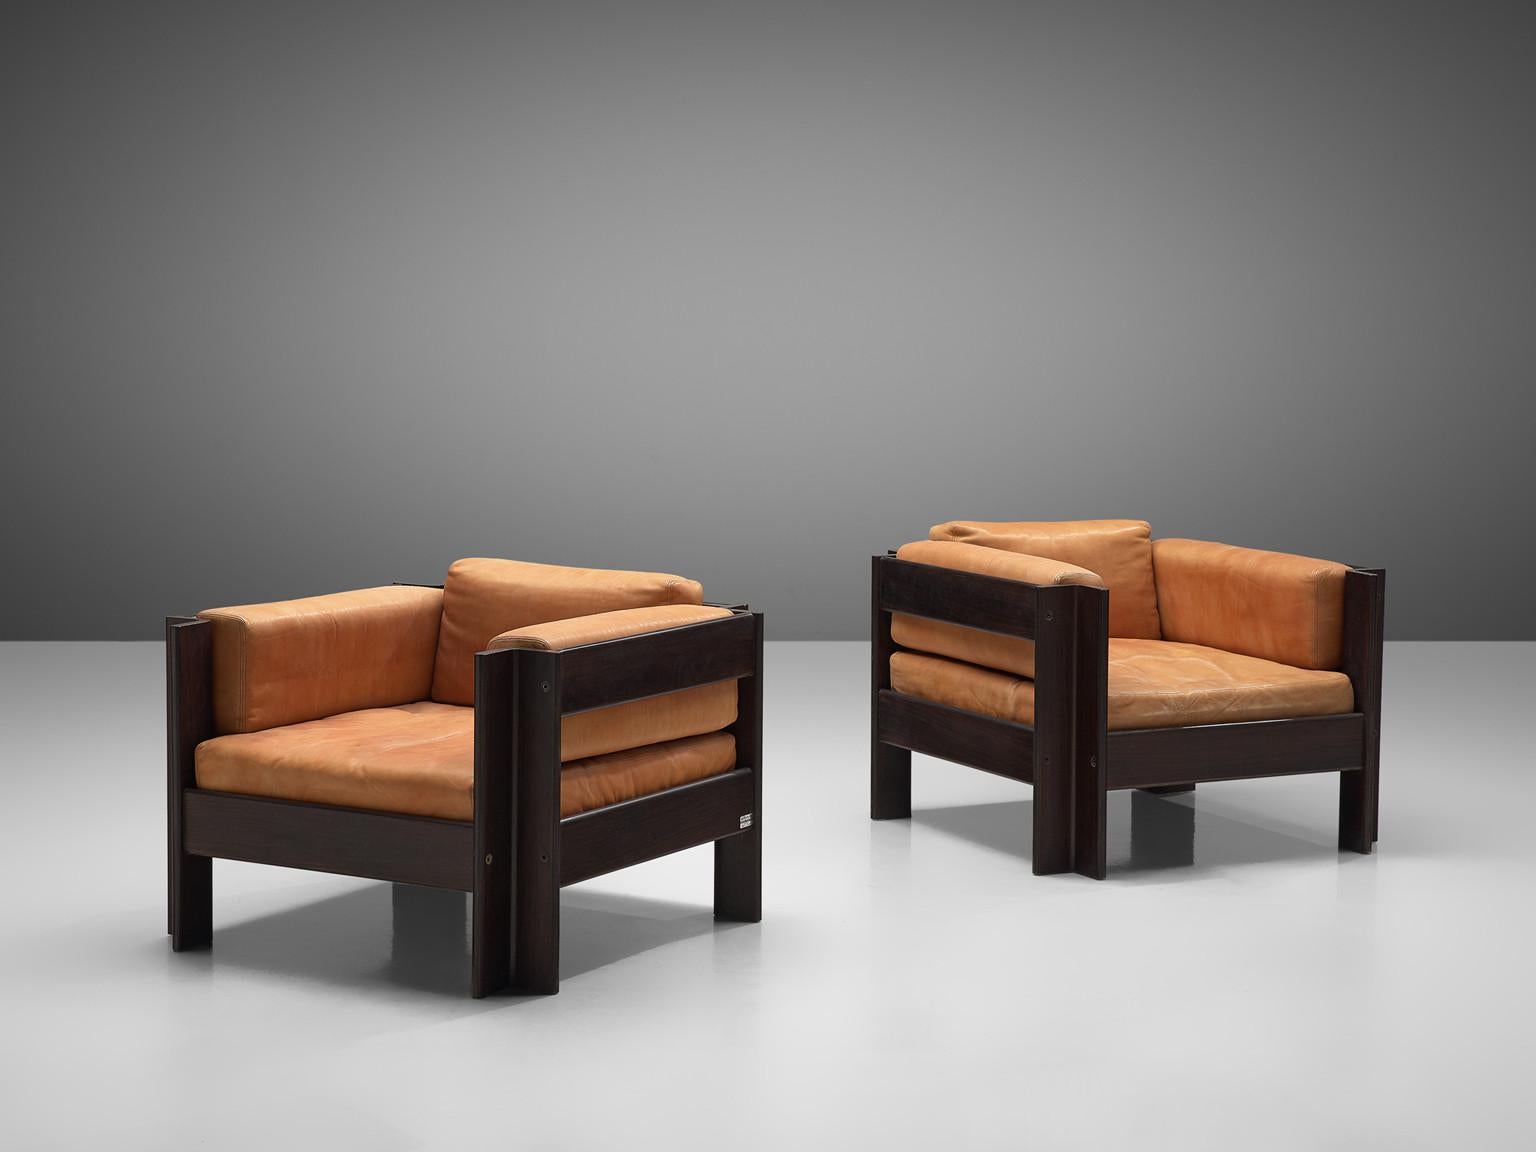 Sergio Asti for Poltronova, 'Zelda' lounge chairs, leather, darkened wood, Italy, 1962.

Beautiful lounge chairs designed by Sergio Asti for Poltronova. These chairs are made with a dark wooden frame and terracotta/cognac colored leather cushions.